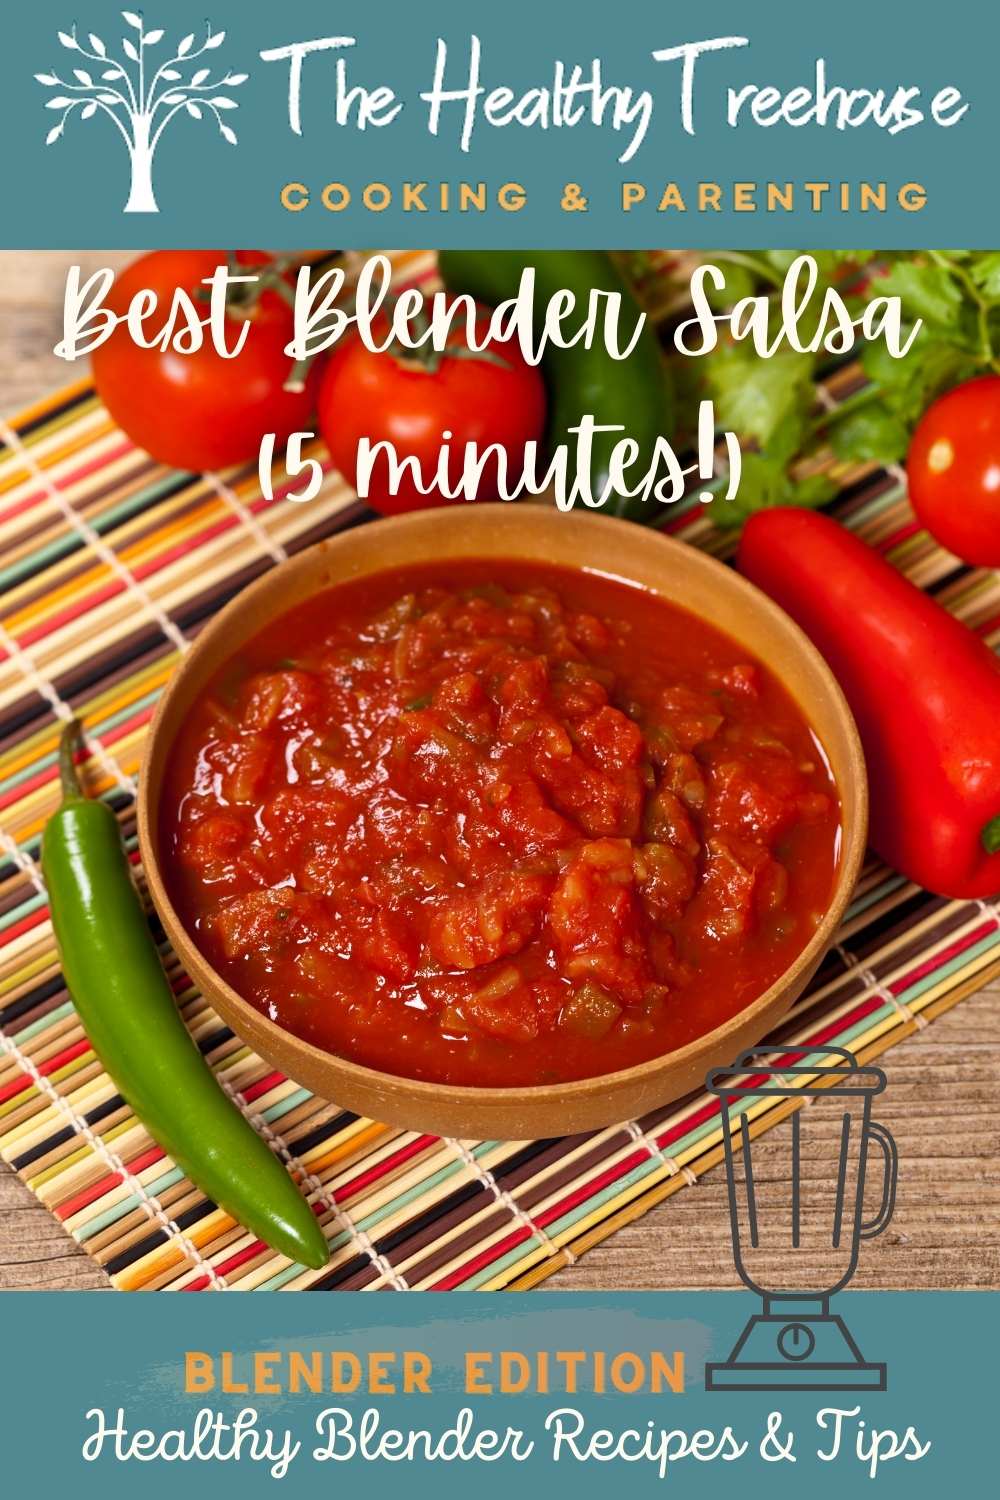 Best Blender Salsa Recipe (5 Minutes!) - The Healthy Treehouse